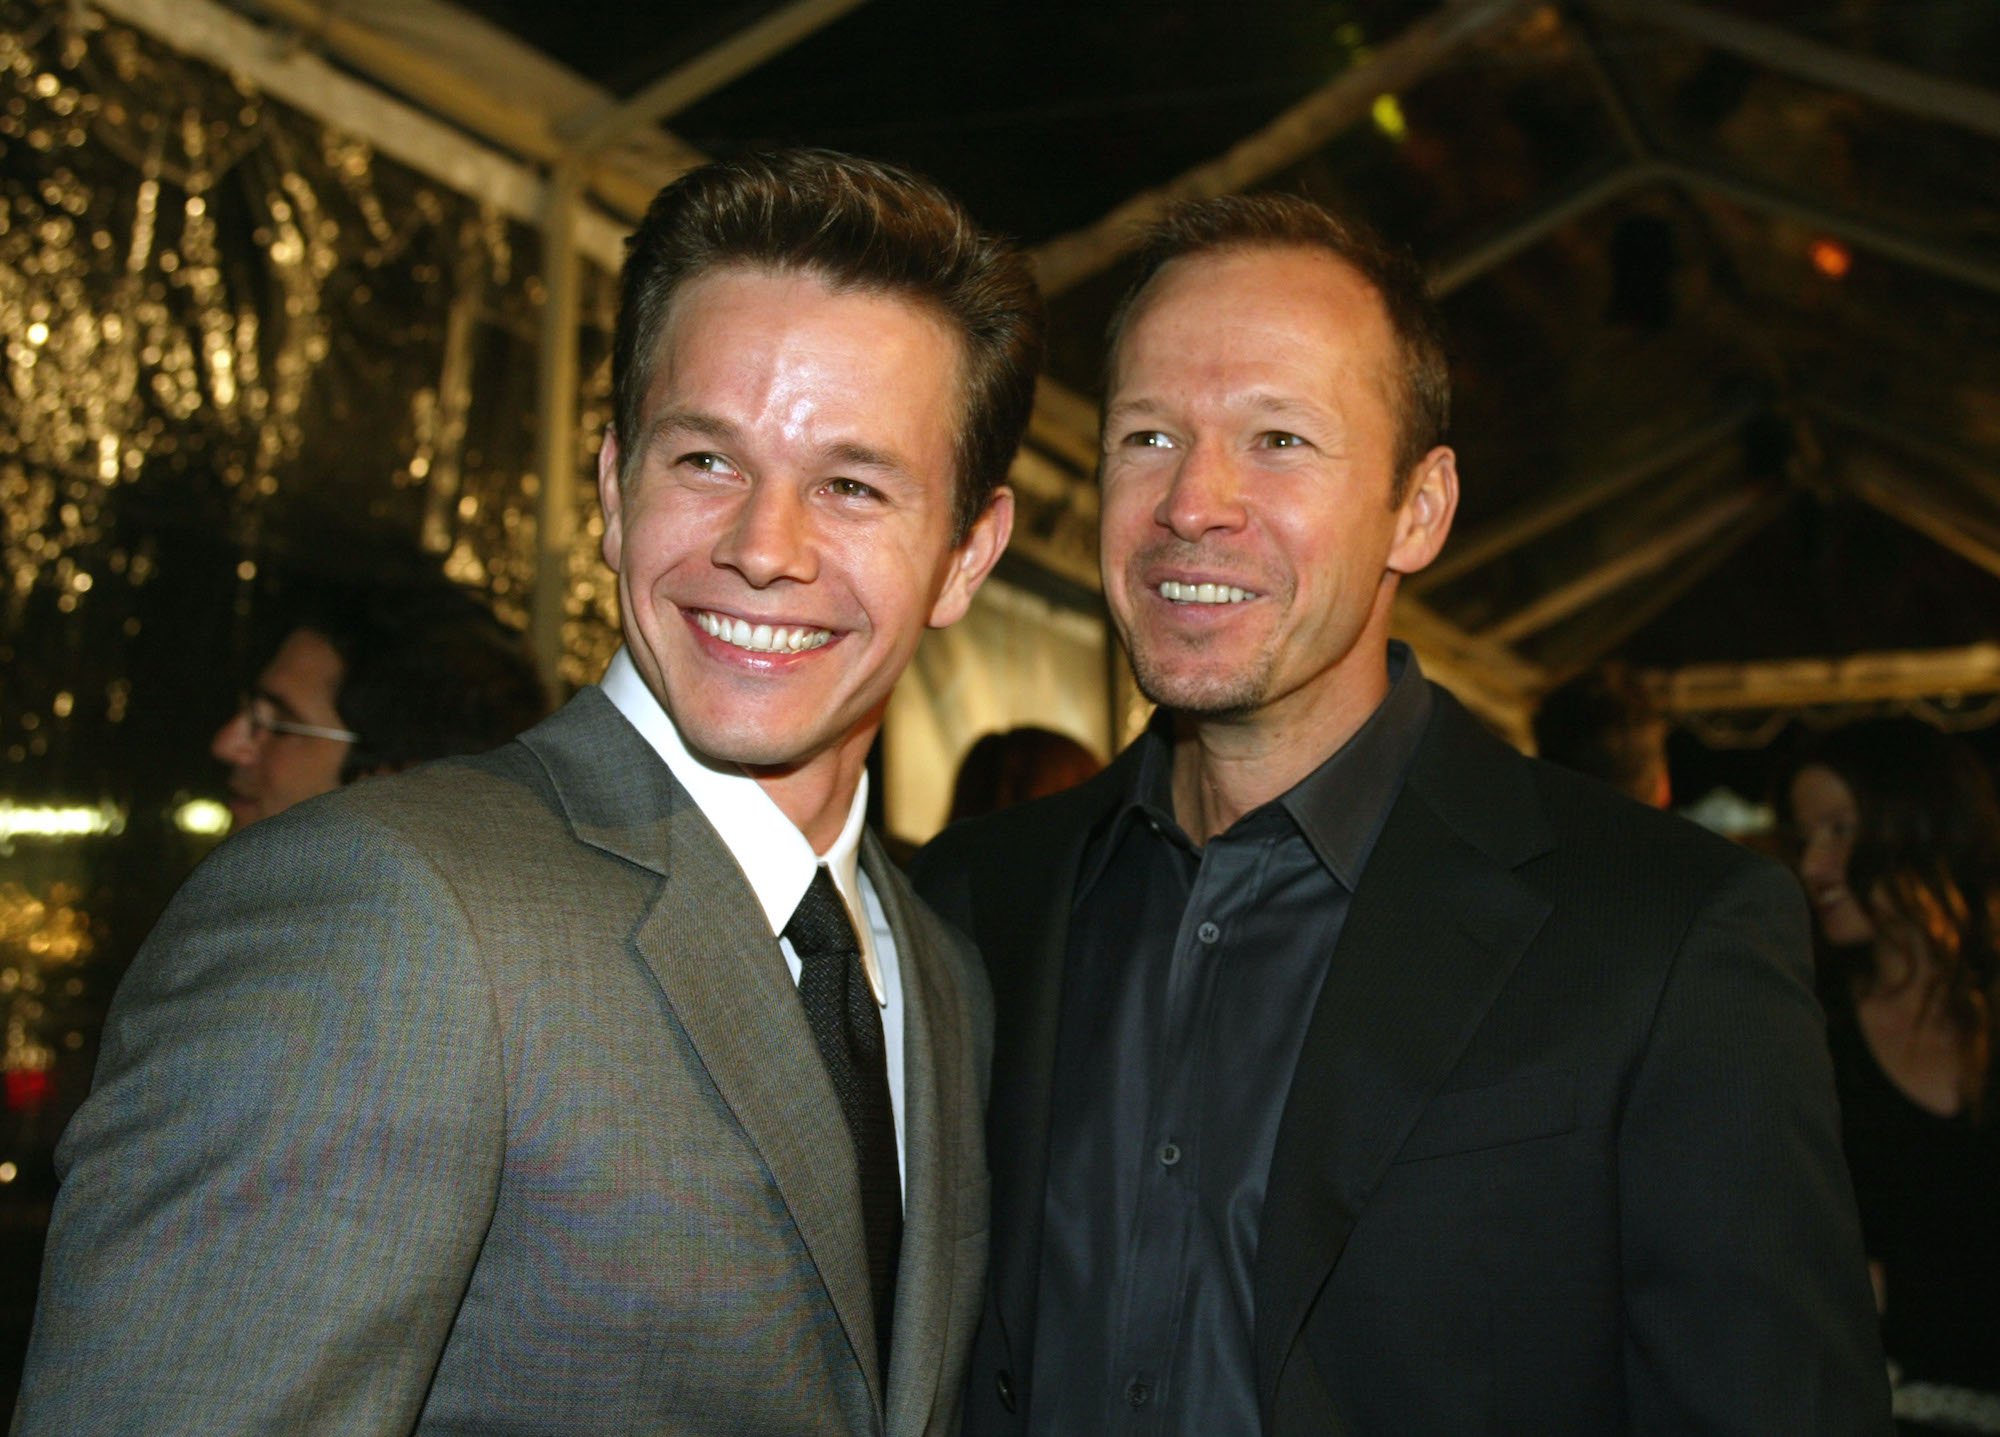 (L-R) Mark Wahlberg and Donnie Wahlberg smiling, looking to the left